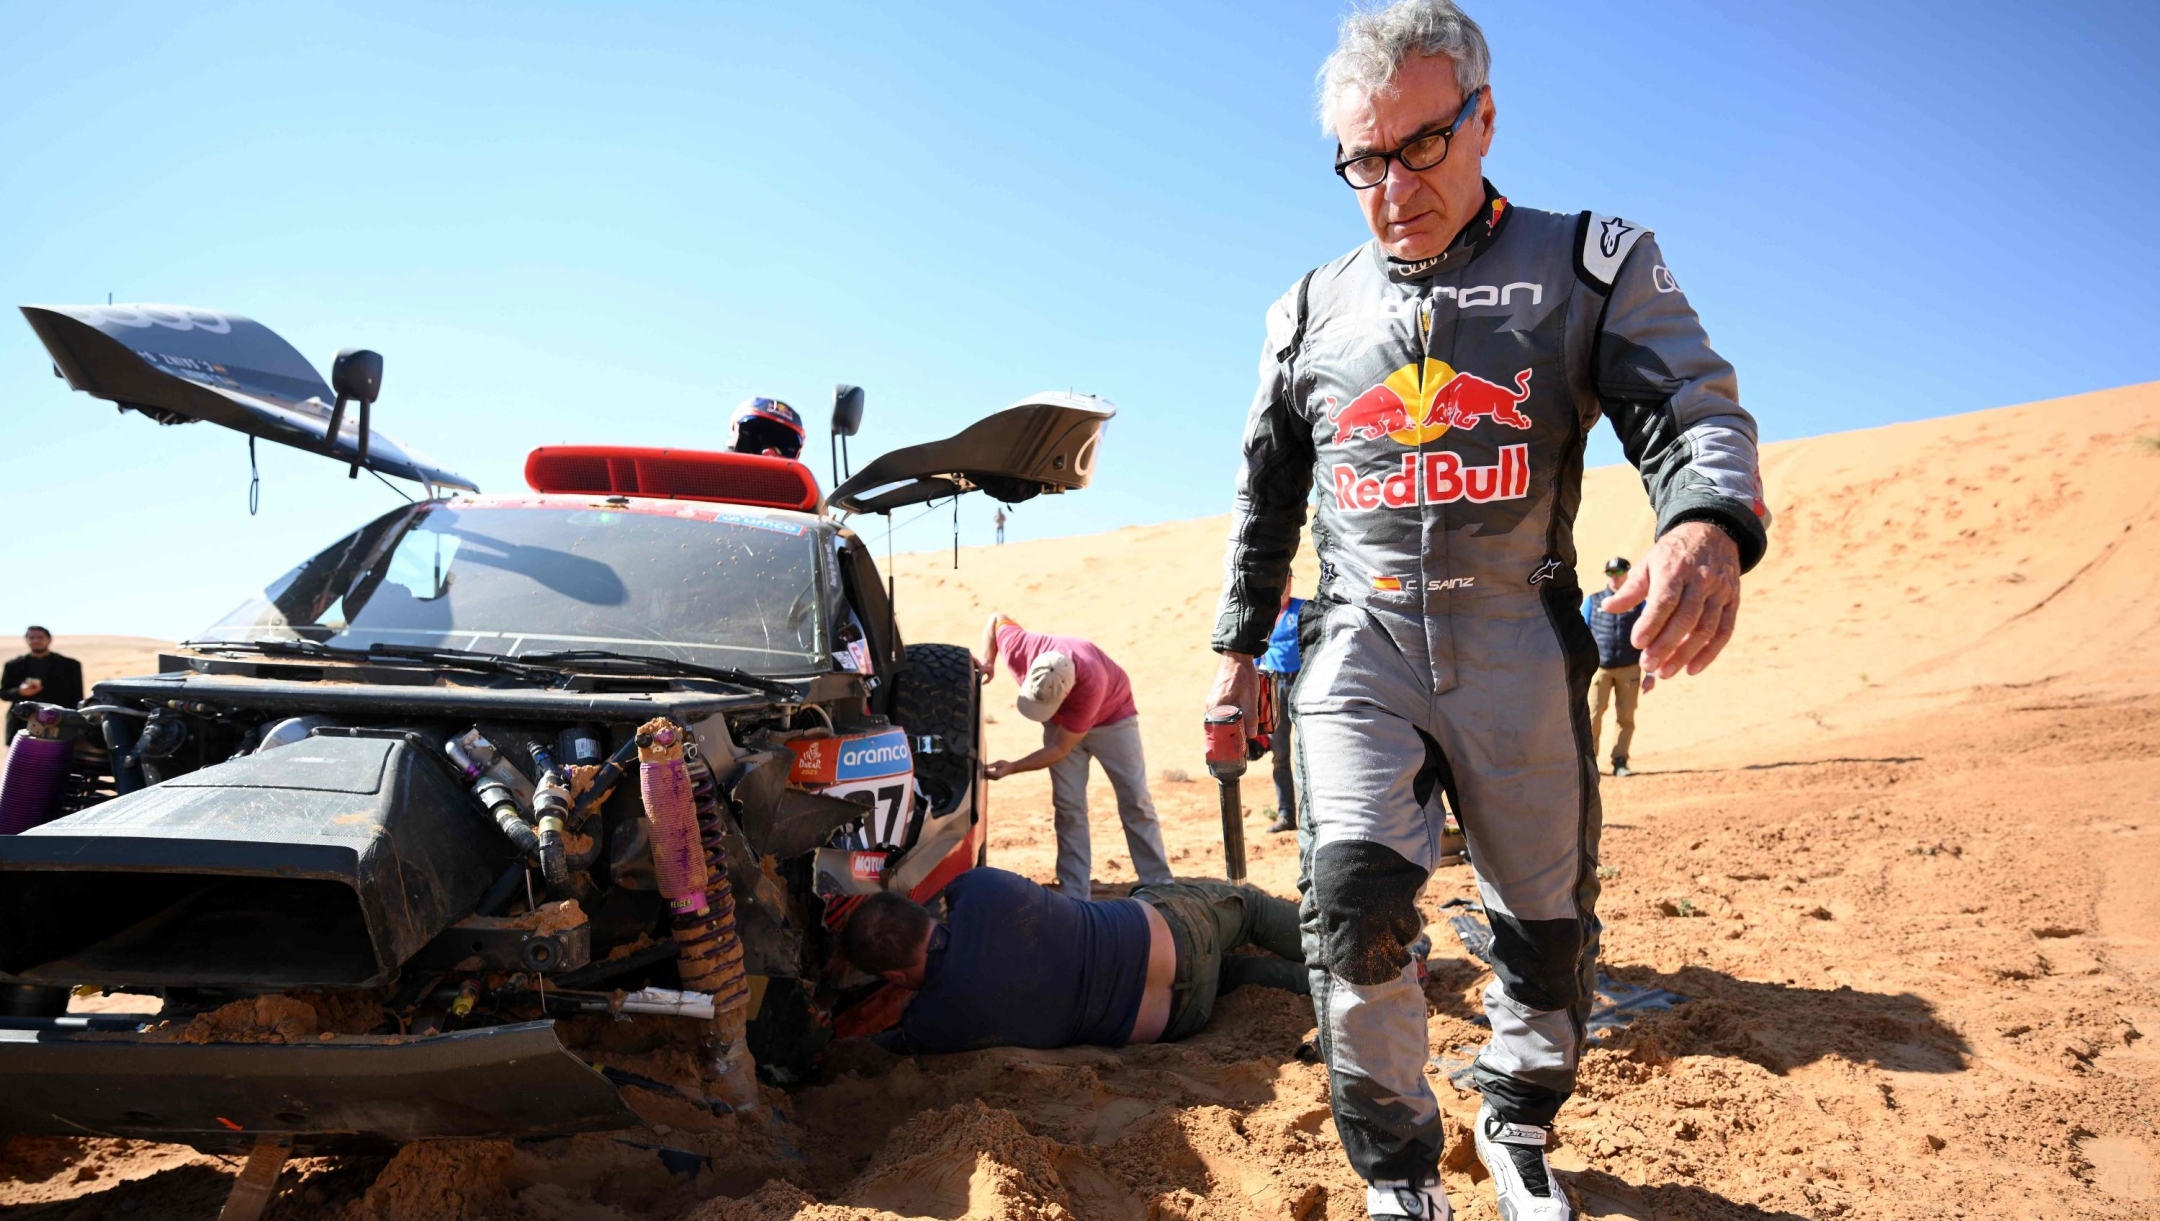 Audi's hybrid driver Carlos Sainz (R) of Spain walks next to his car after a crash during the Stage 6 of the Dakar 2023 between Ha'il and Al Duwadimi, Saudi Arabia, on January 6, 2023. (Photo by FRANCK FIFE / AFP)